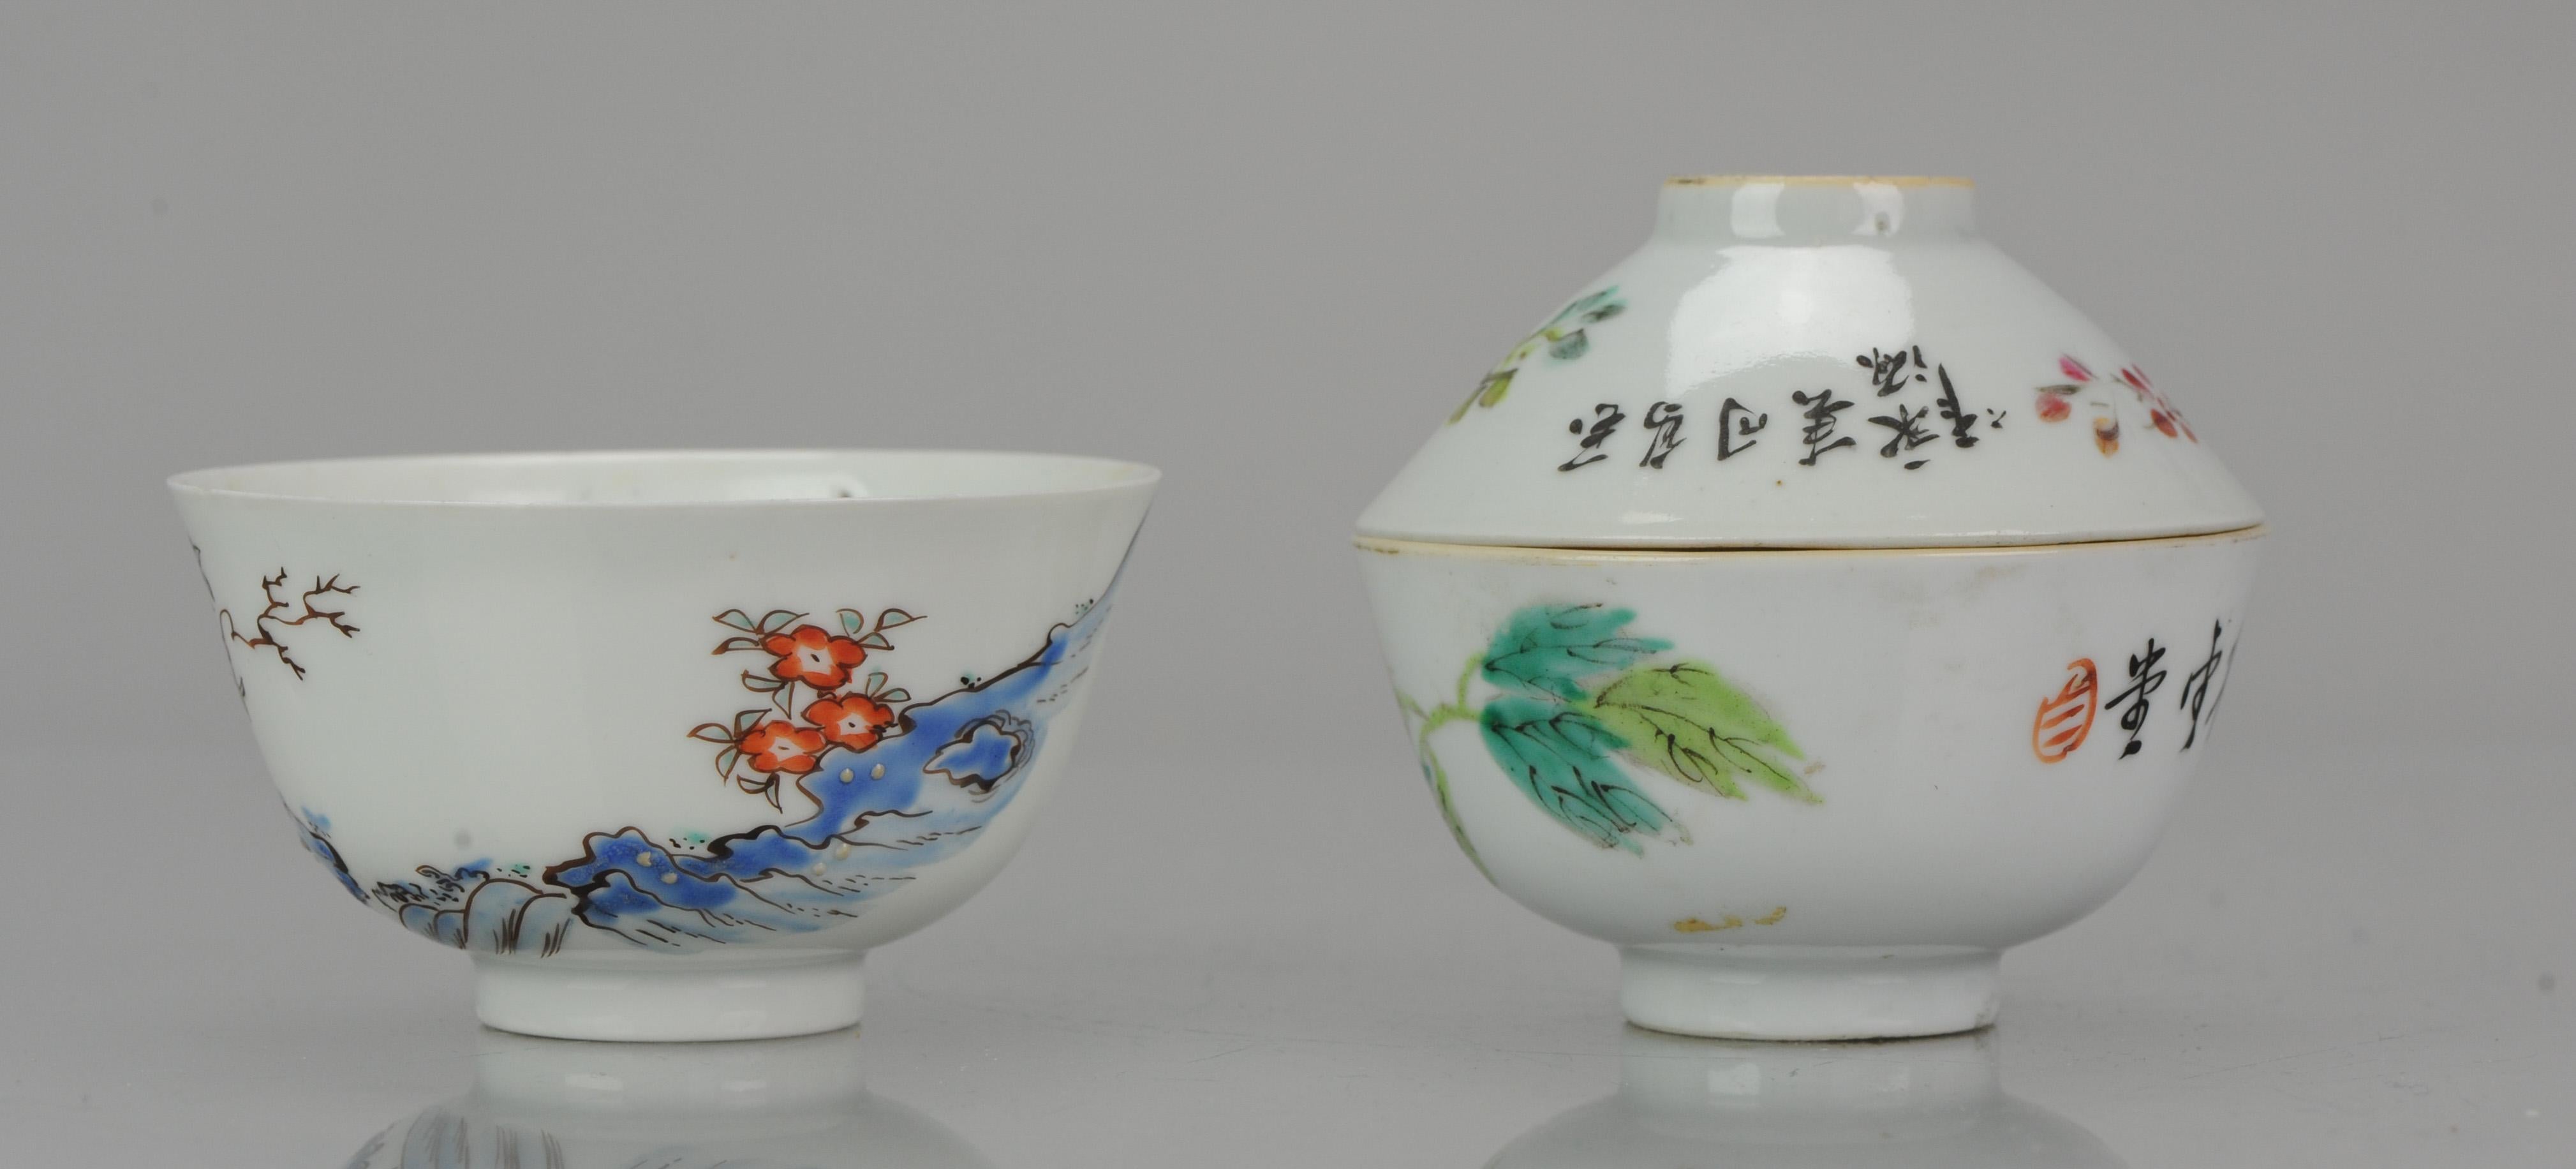 Lovely bowl, 1 japanese and 1 chinese gaiwain. Both with lovely bird scene.

Additional information:
Material: Porcelain & Pottery
Type: Plates
Region of Origin: China
Period: 19th century Qing (1661 - 1912)
Age: 19th century
Condition: Chinese